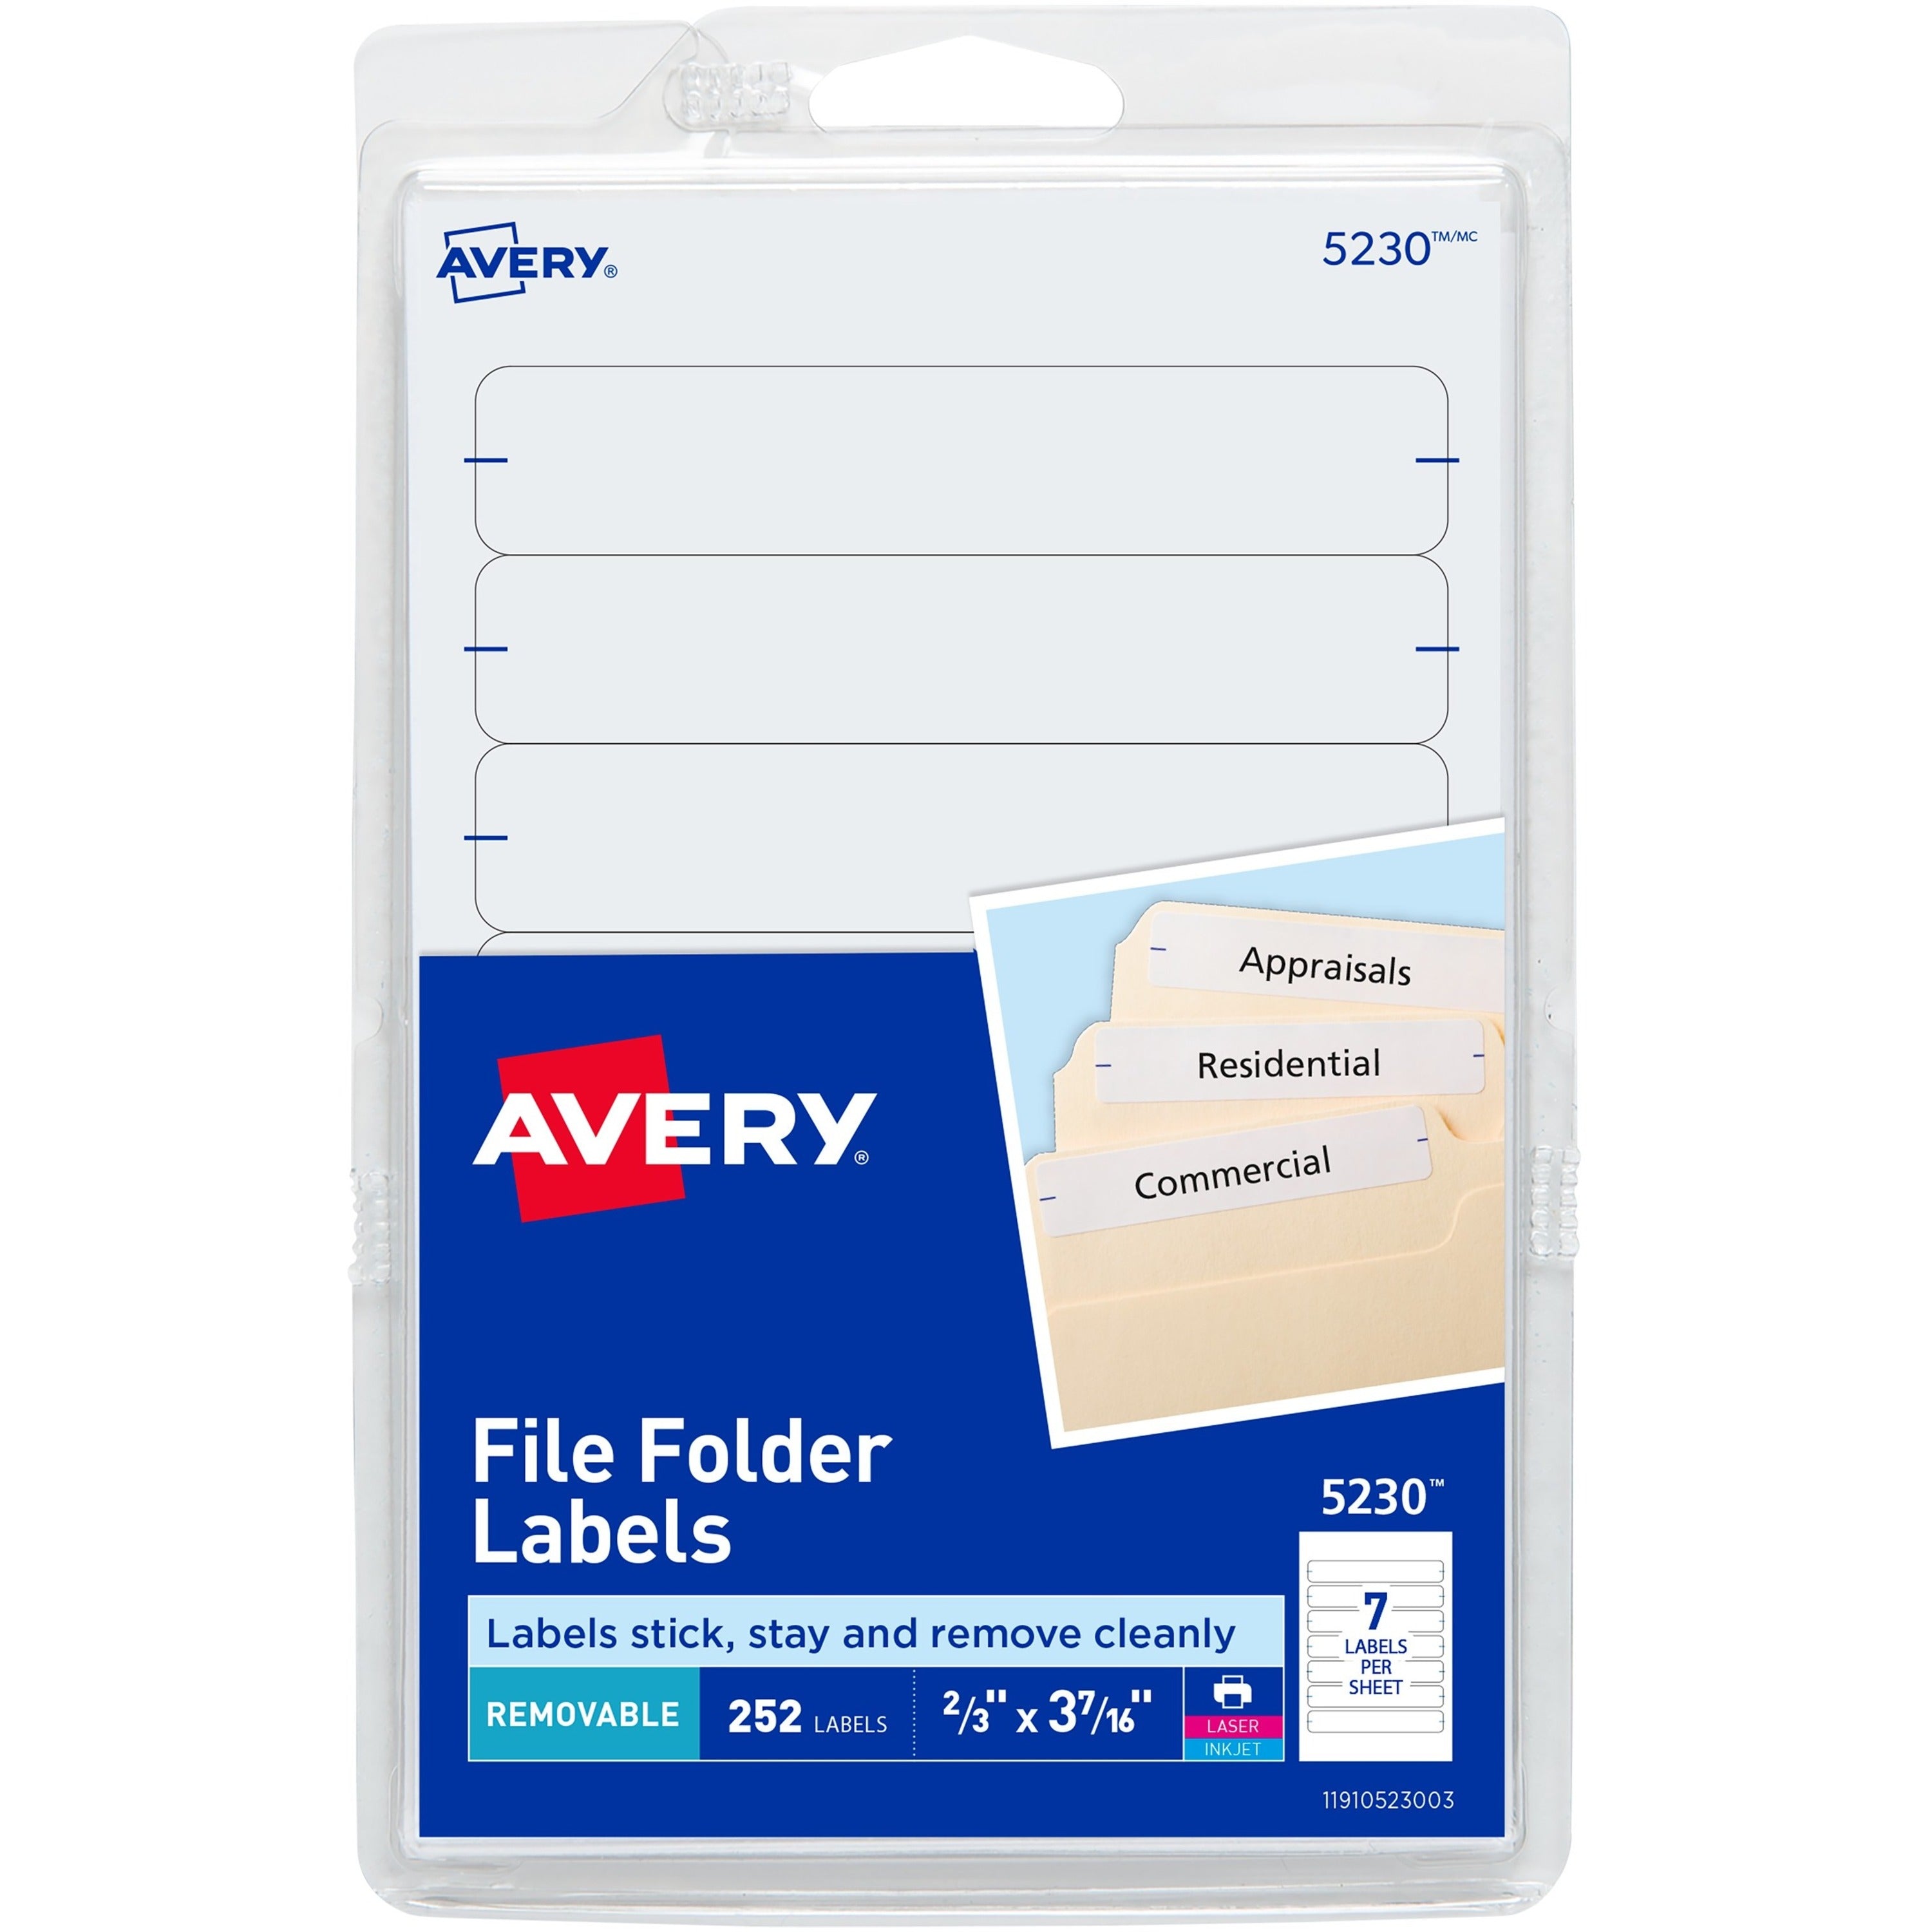 avery-removable-file-folder-labels-21-32-width-x-3-7-16-length-removable-adhesive-rectangle-laser-inkjet-white-paper-7-sheet-648-total-sheets-4536-total-labels-18-carton_ave05230 - 1